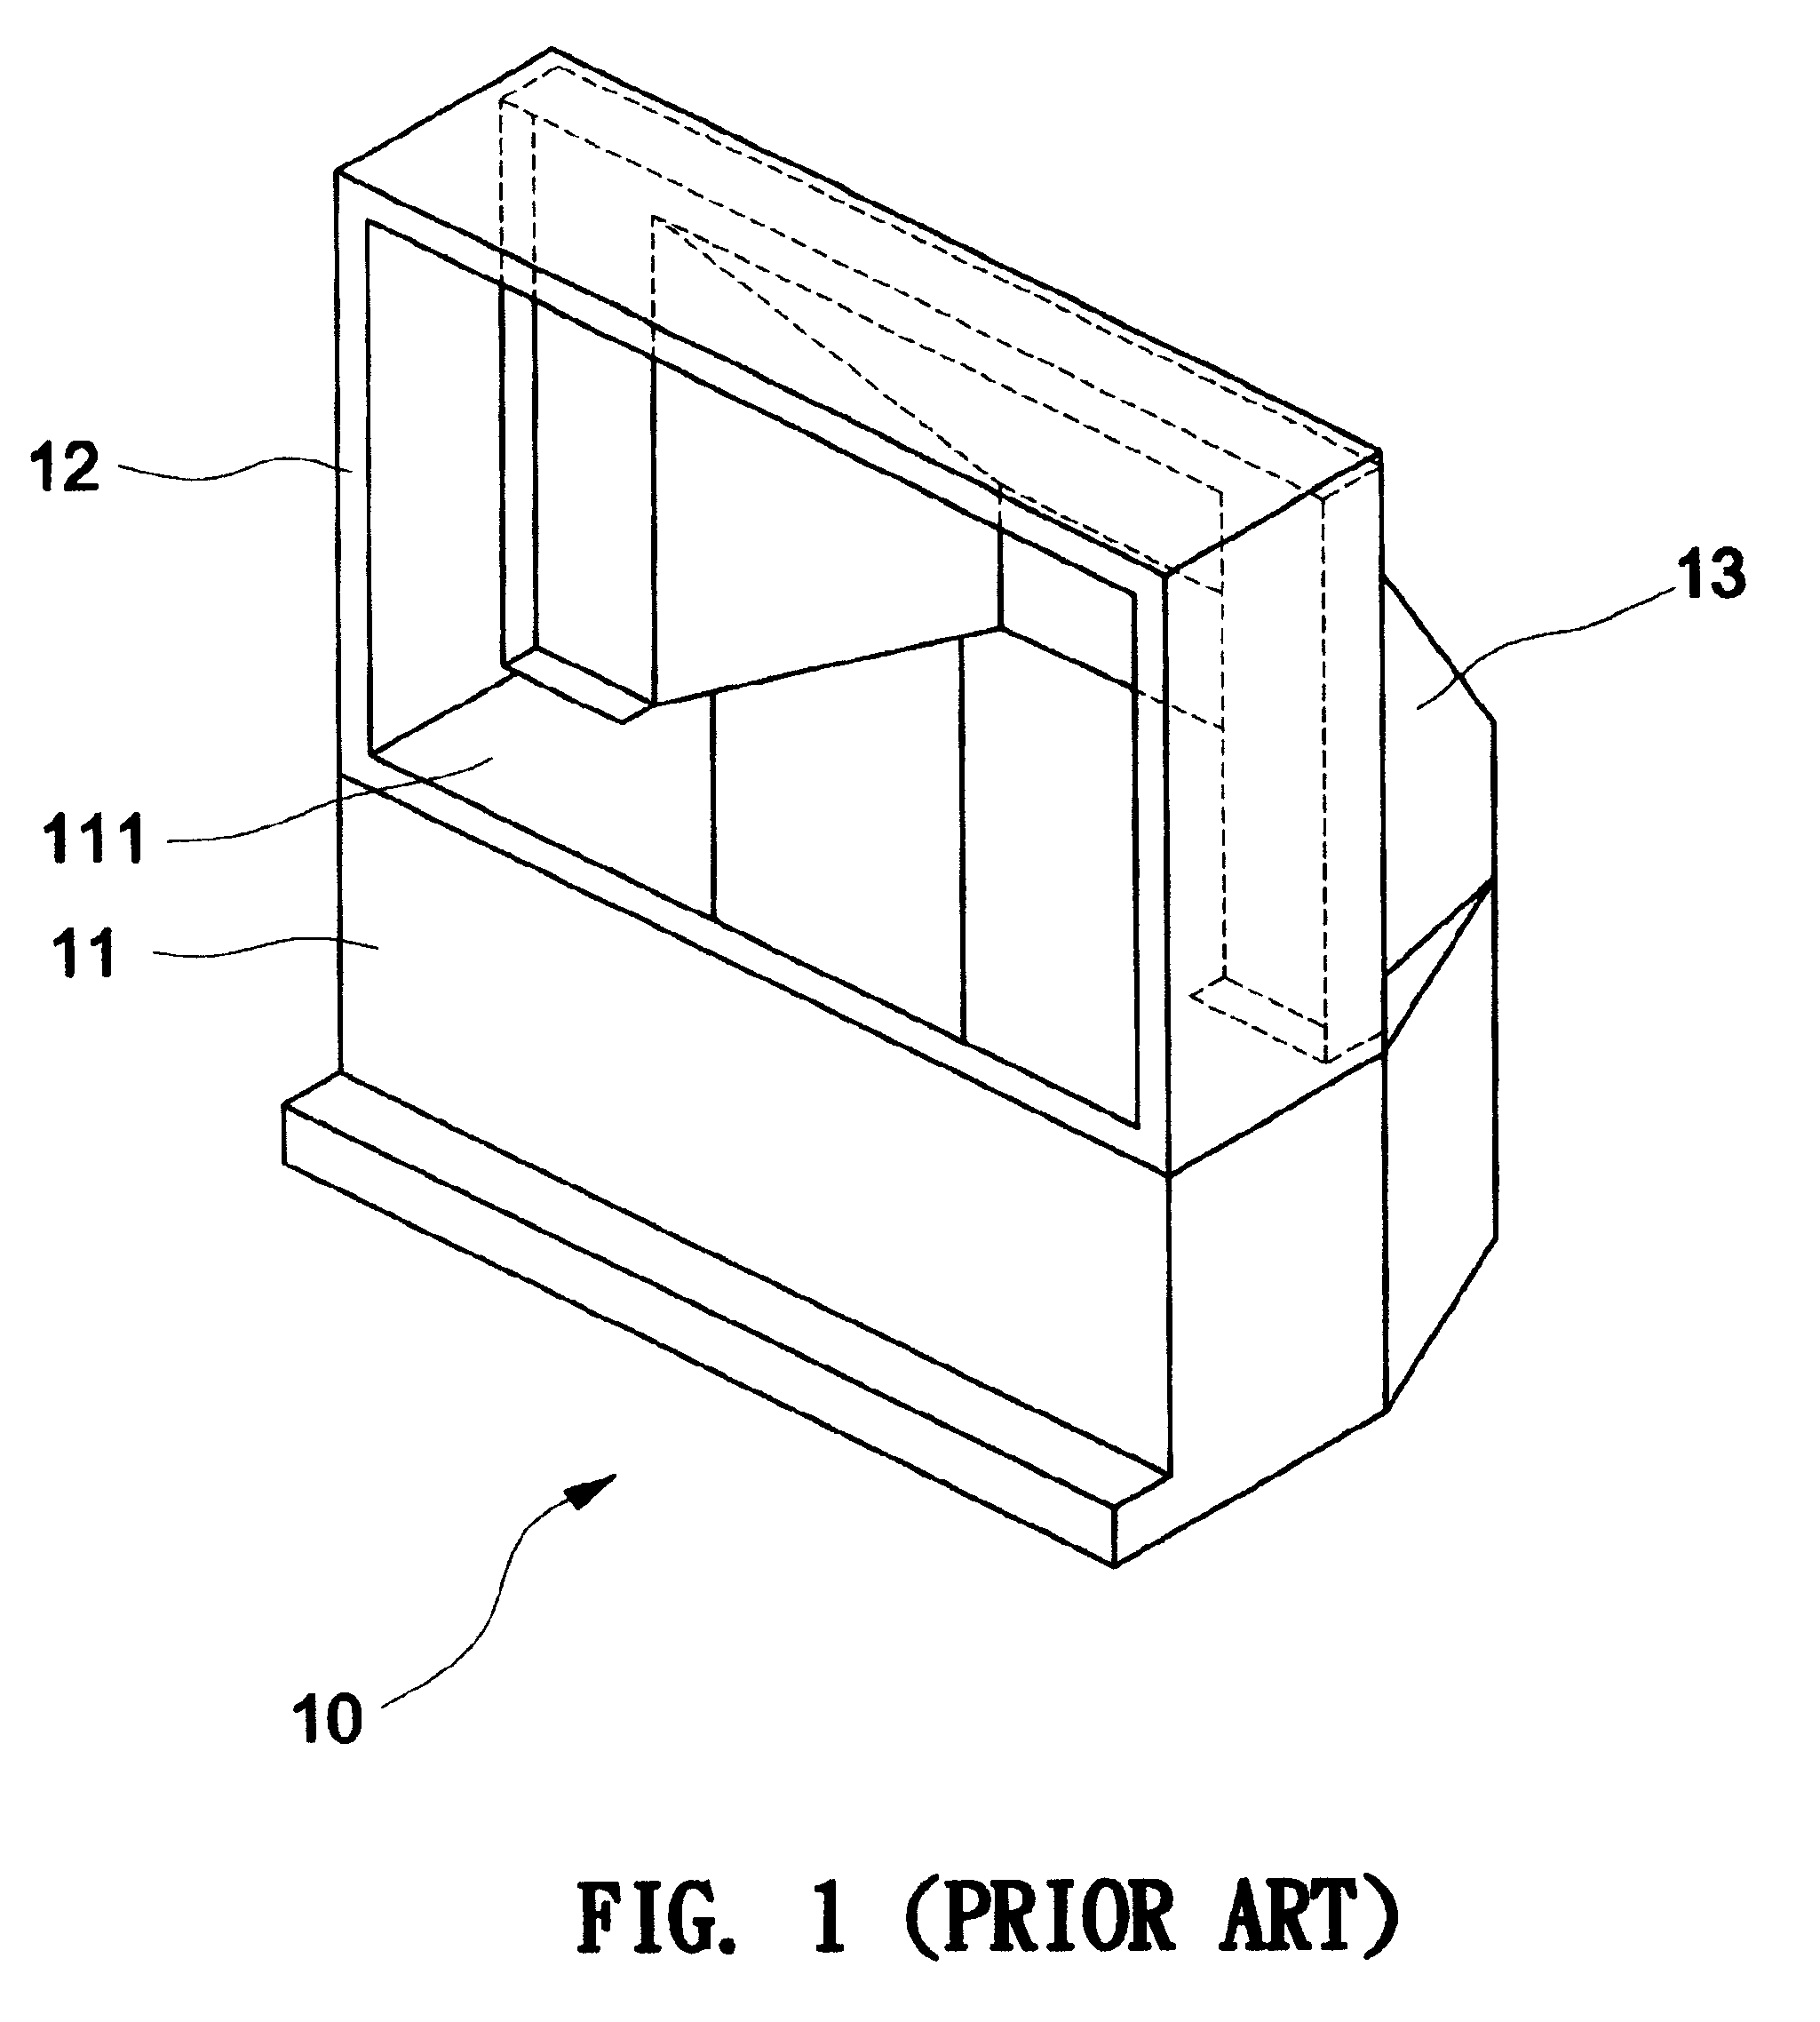 Easy-maintain rear projection television